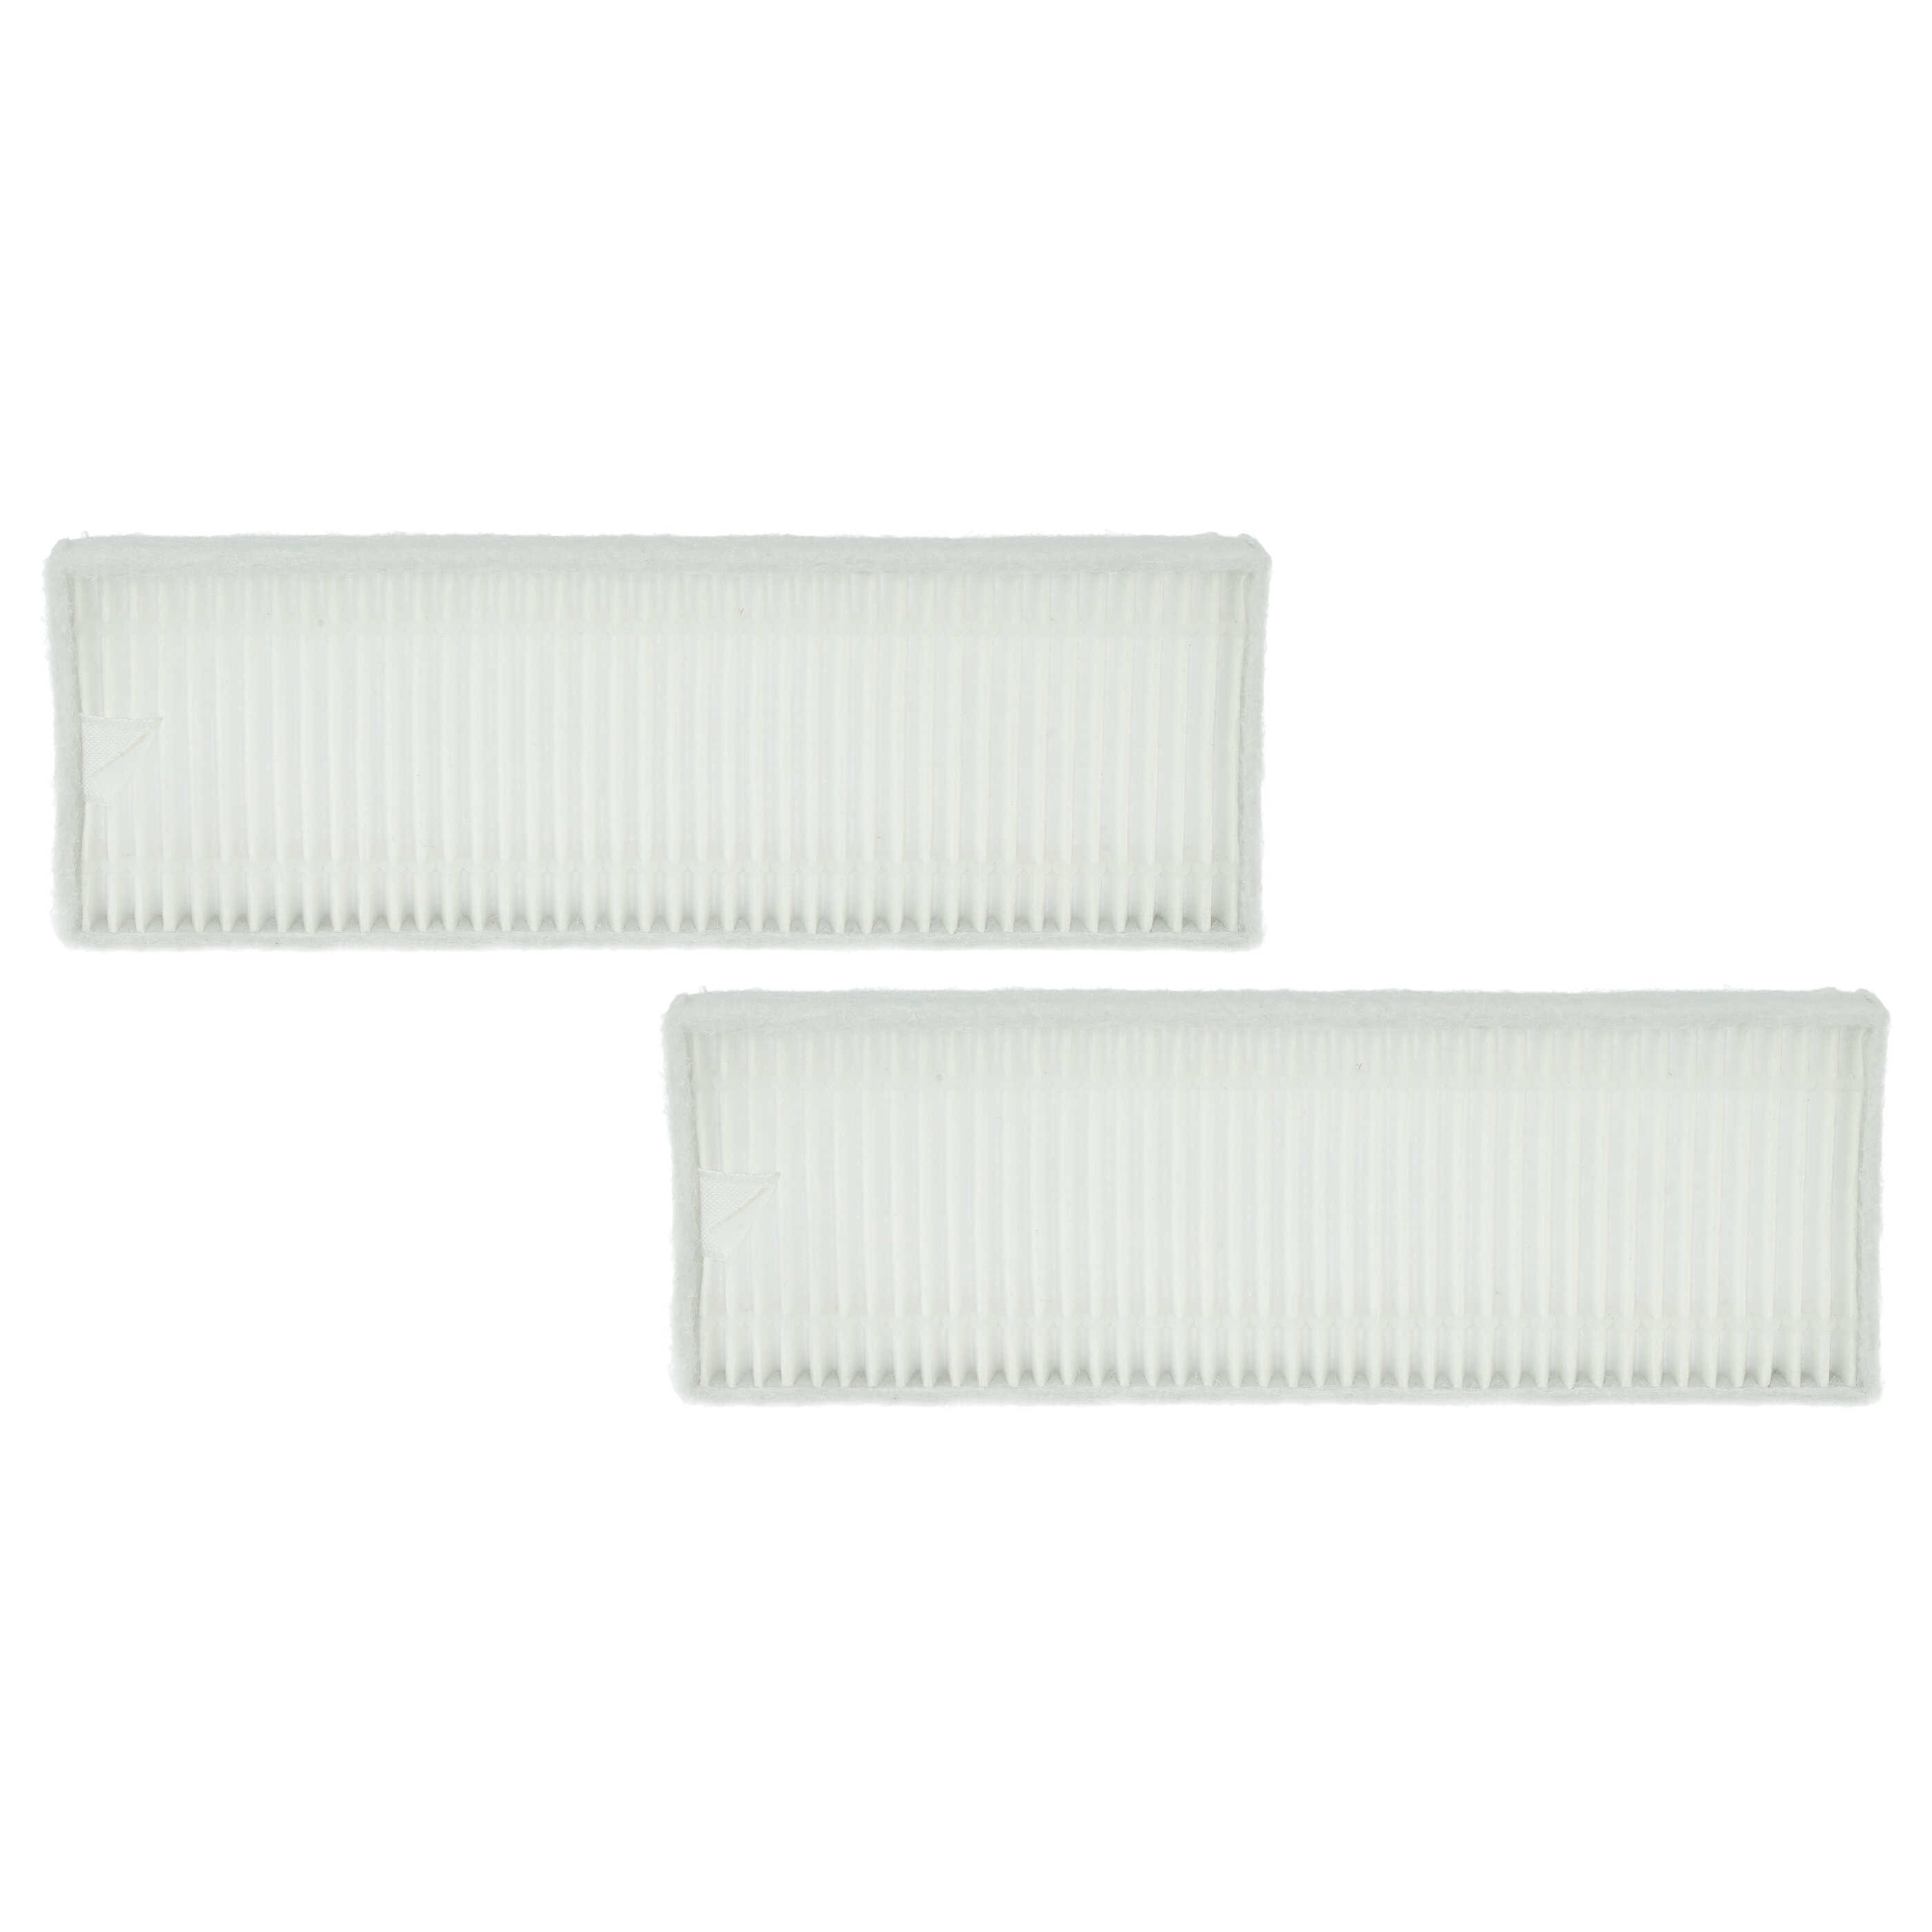 2x Filter Element suitable for M7, 3490/4090, STYJ02YM, V-RVCLM21B Proscenic, Cecotec, Xiaomi M7 Robot Vacuum 